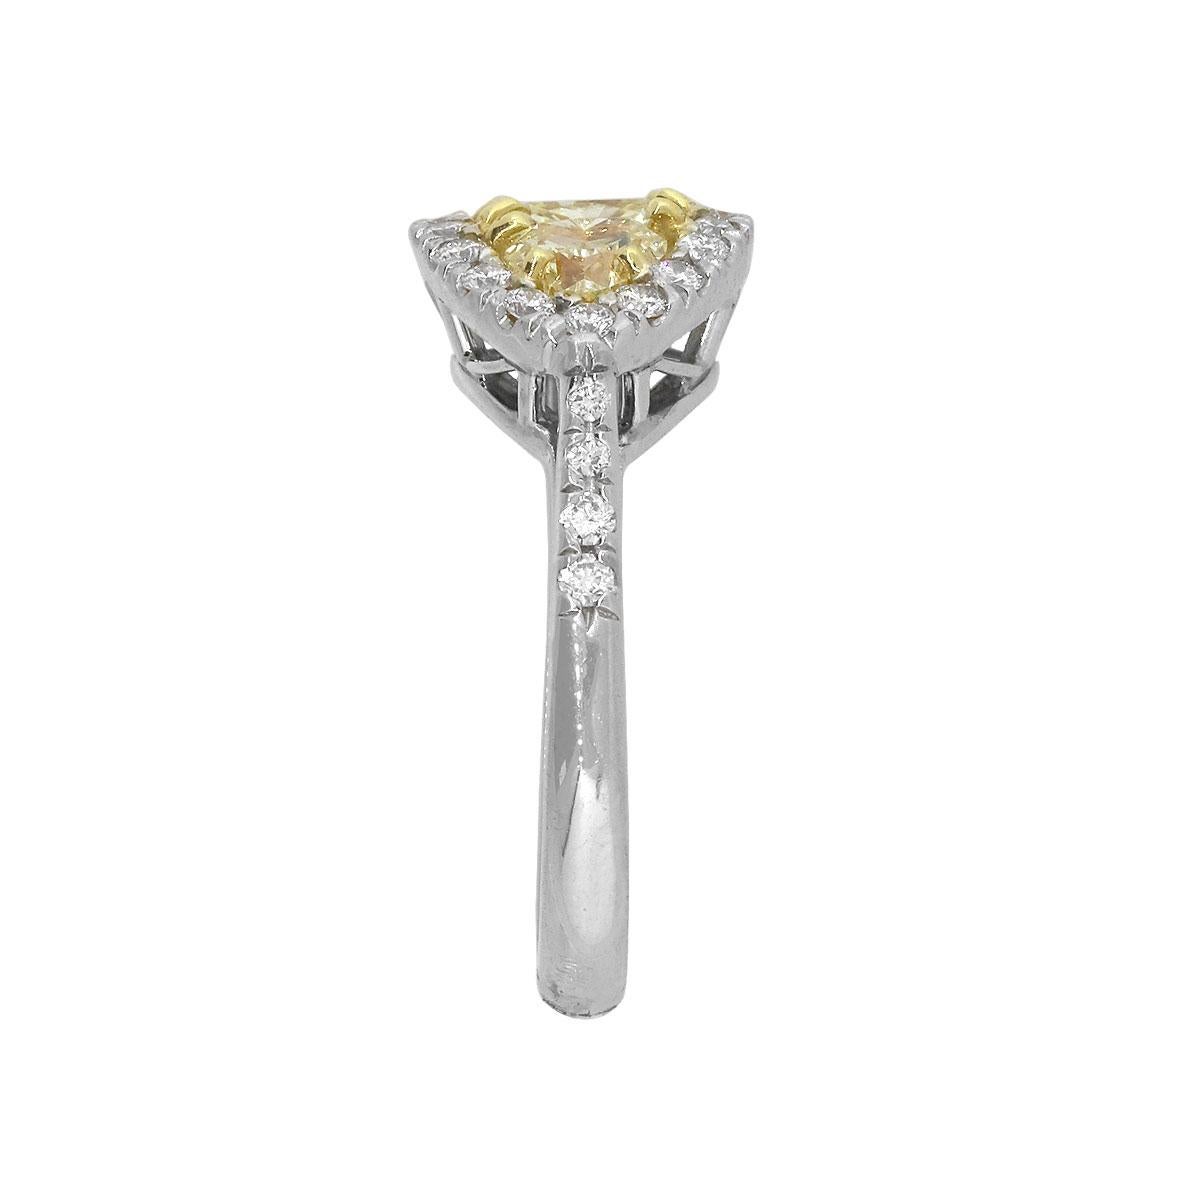 Material: 18k White Gold
Fancy Diamond Details: Approx. 0.91ctw Cushion cut Diamond. Diamond is fancy yellow in color and SI in clarity
                                        Approx. 0.90ctw of Heart shaped diamonds. Diamonds are Fancy yellow in